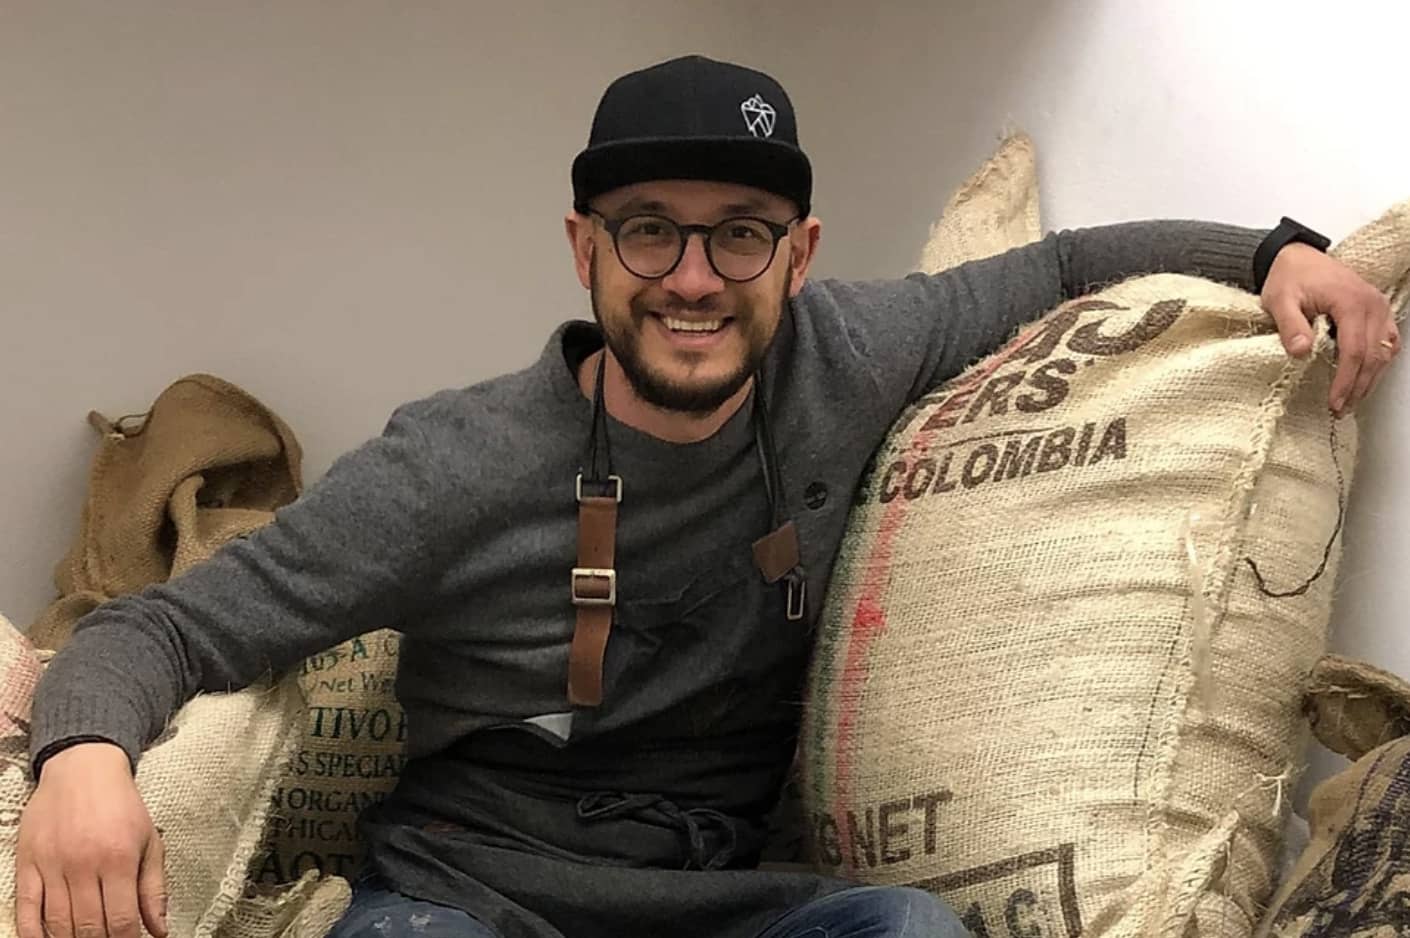 federico from lim sitting on bags of cocoa bean